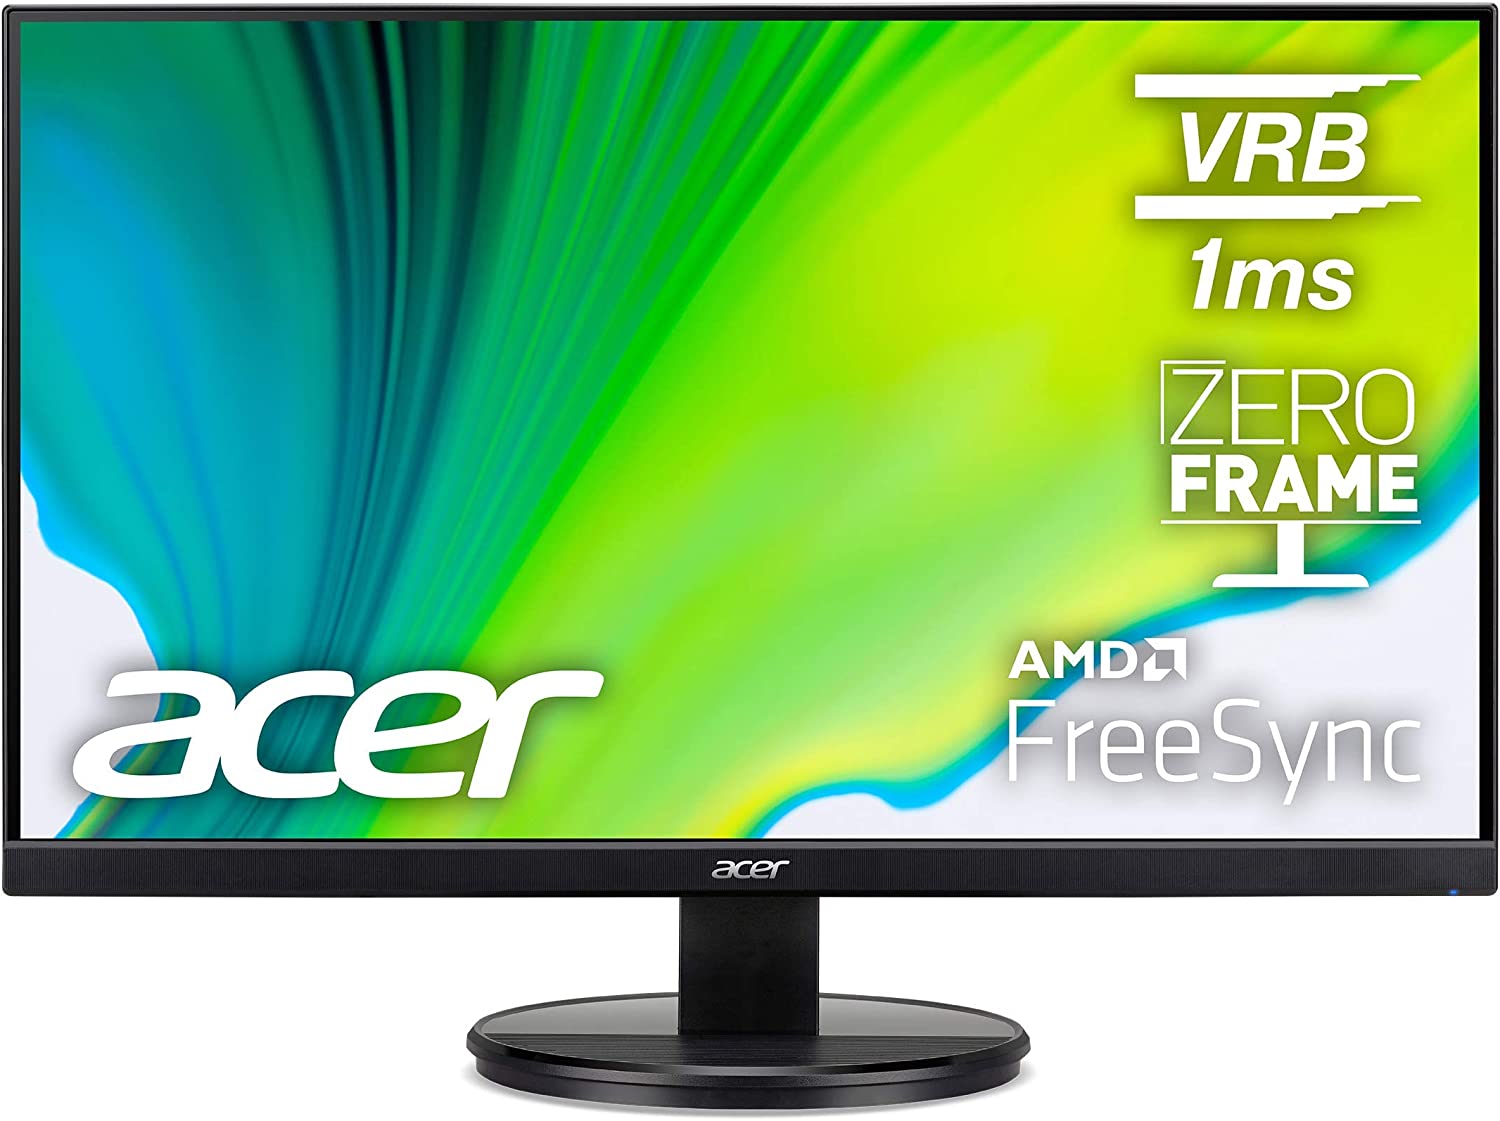 Acer 23.8” Full HD (1920 x 1080) Computer Monitor with AMD Radeon FreeSync Technology, 75Hz - $89.15 + Free Ship